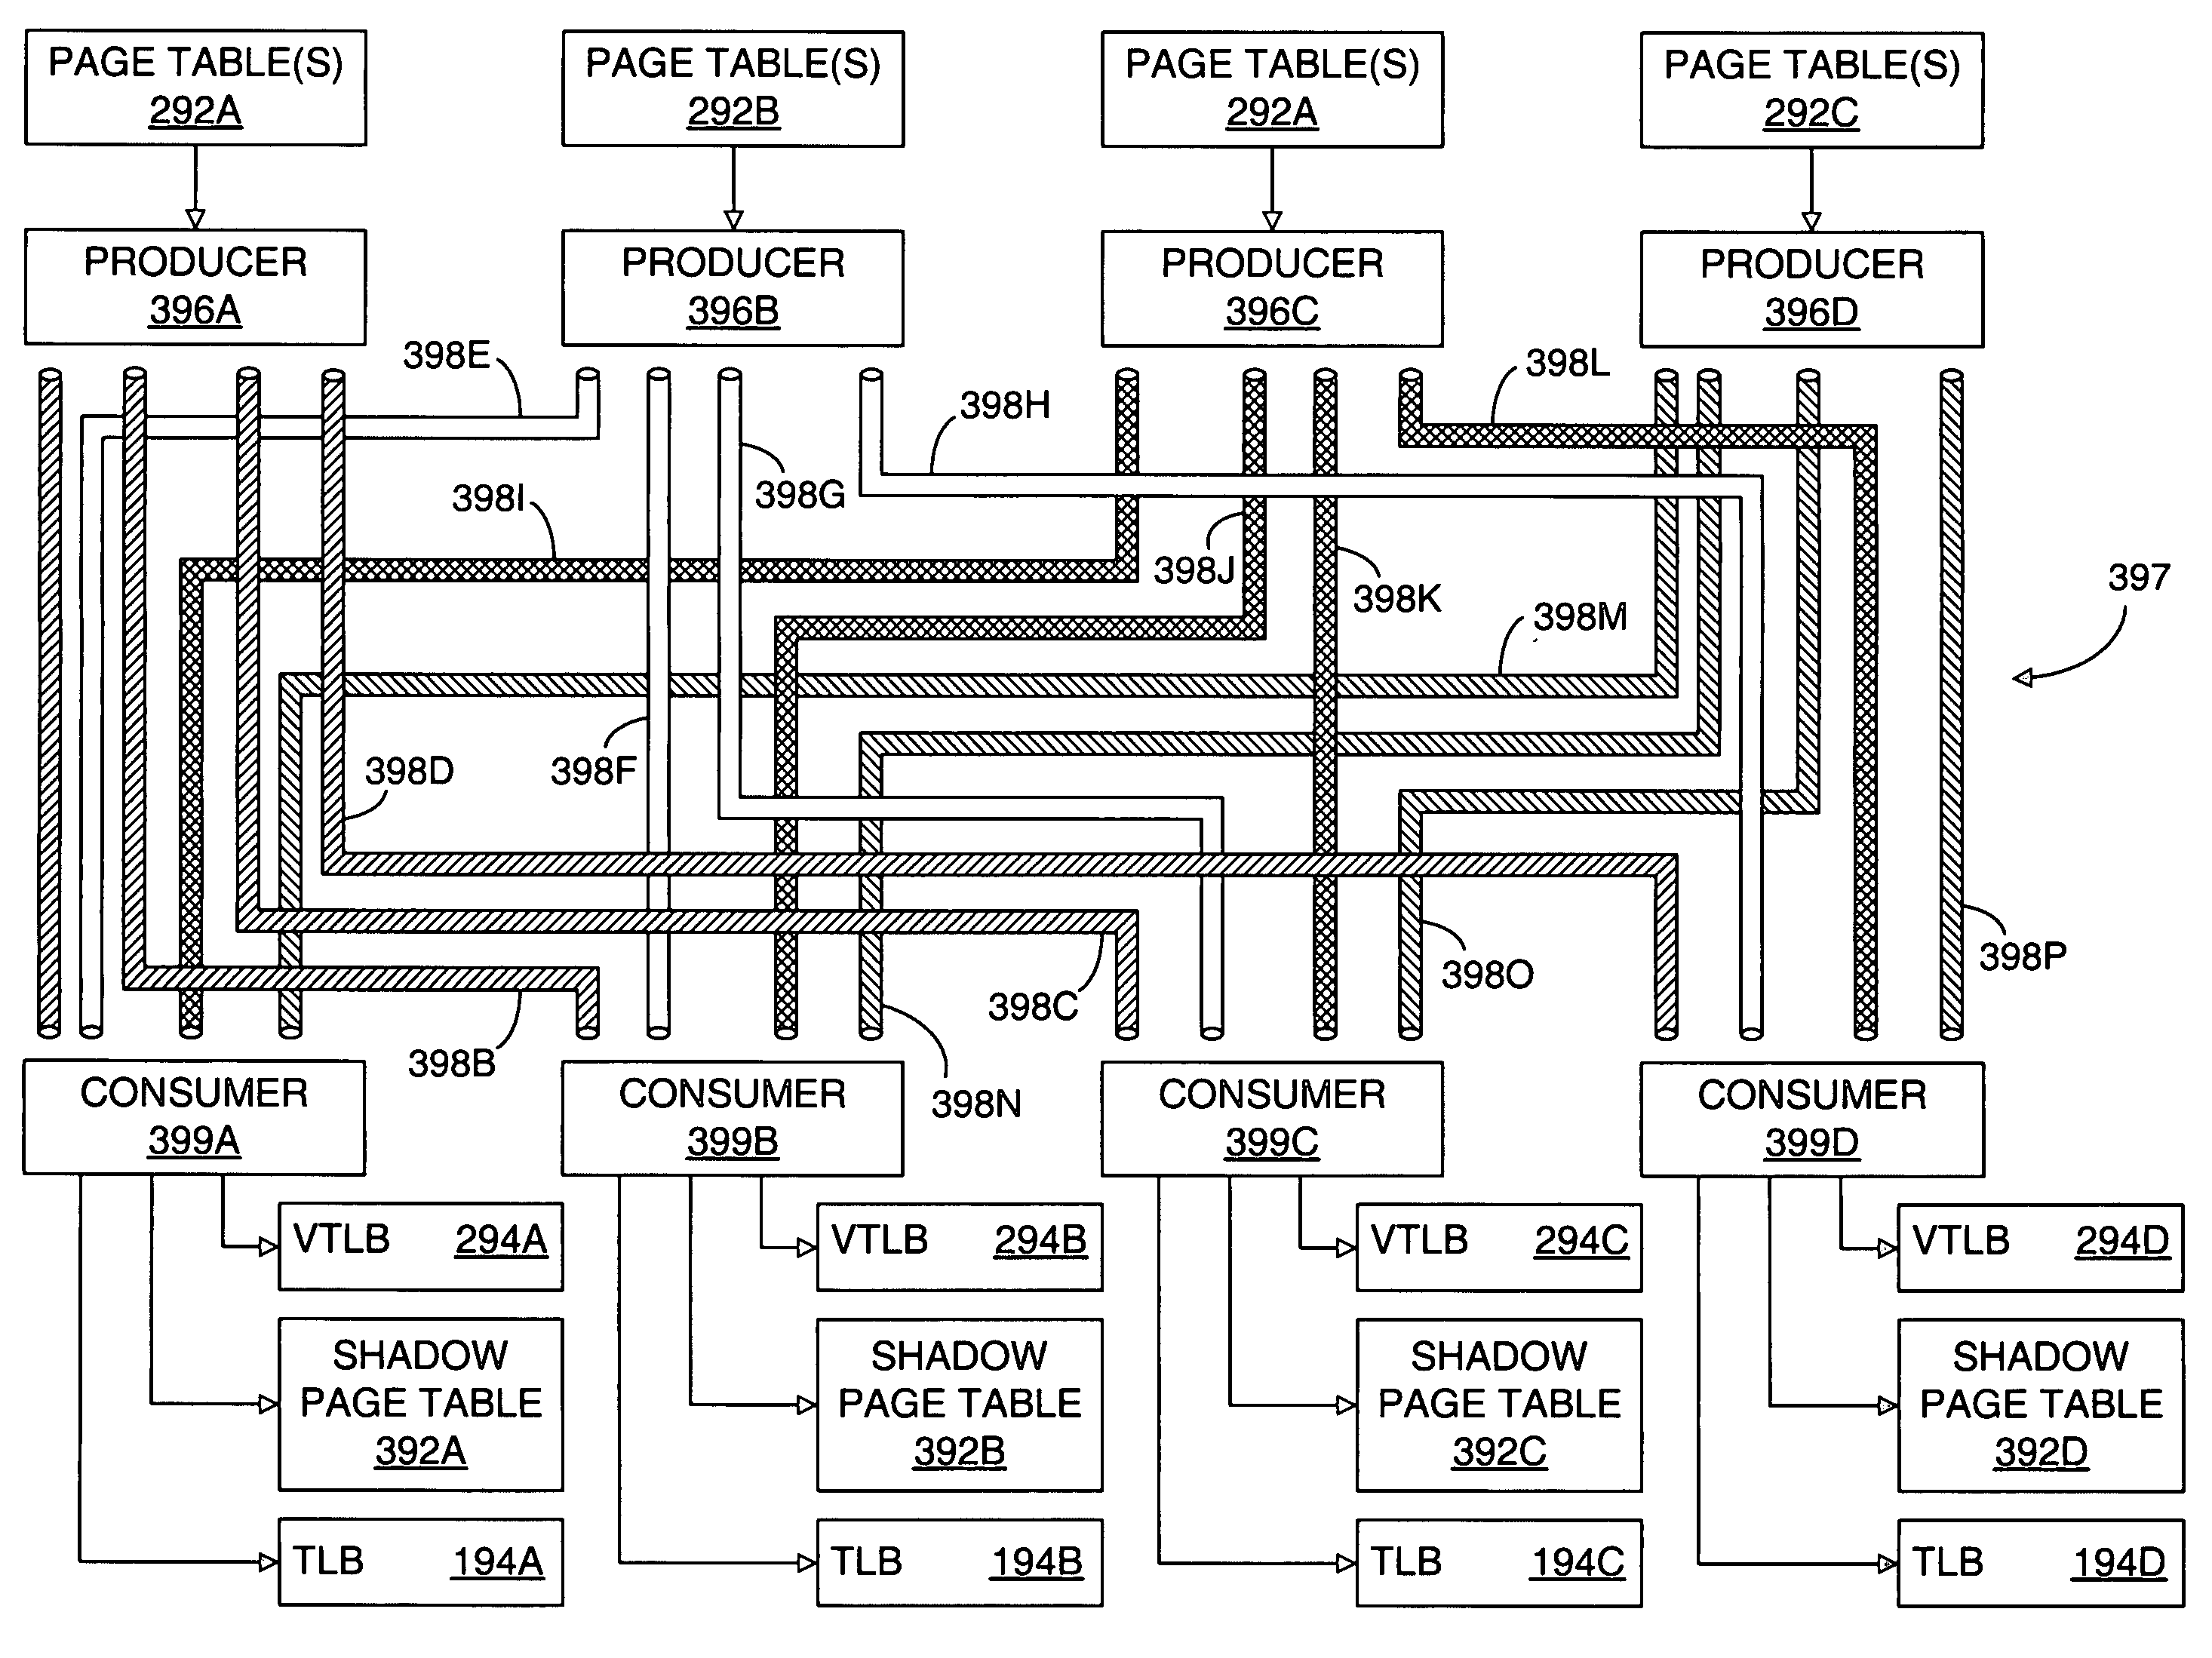 Maintaining coherency of derived data in a computer system